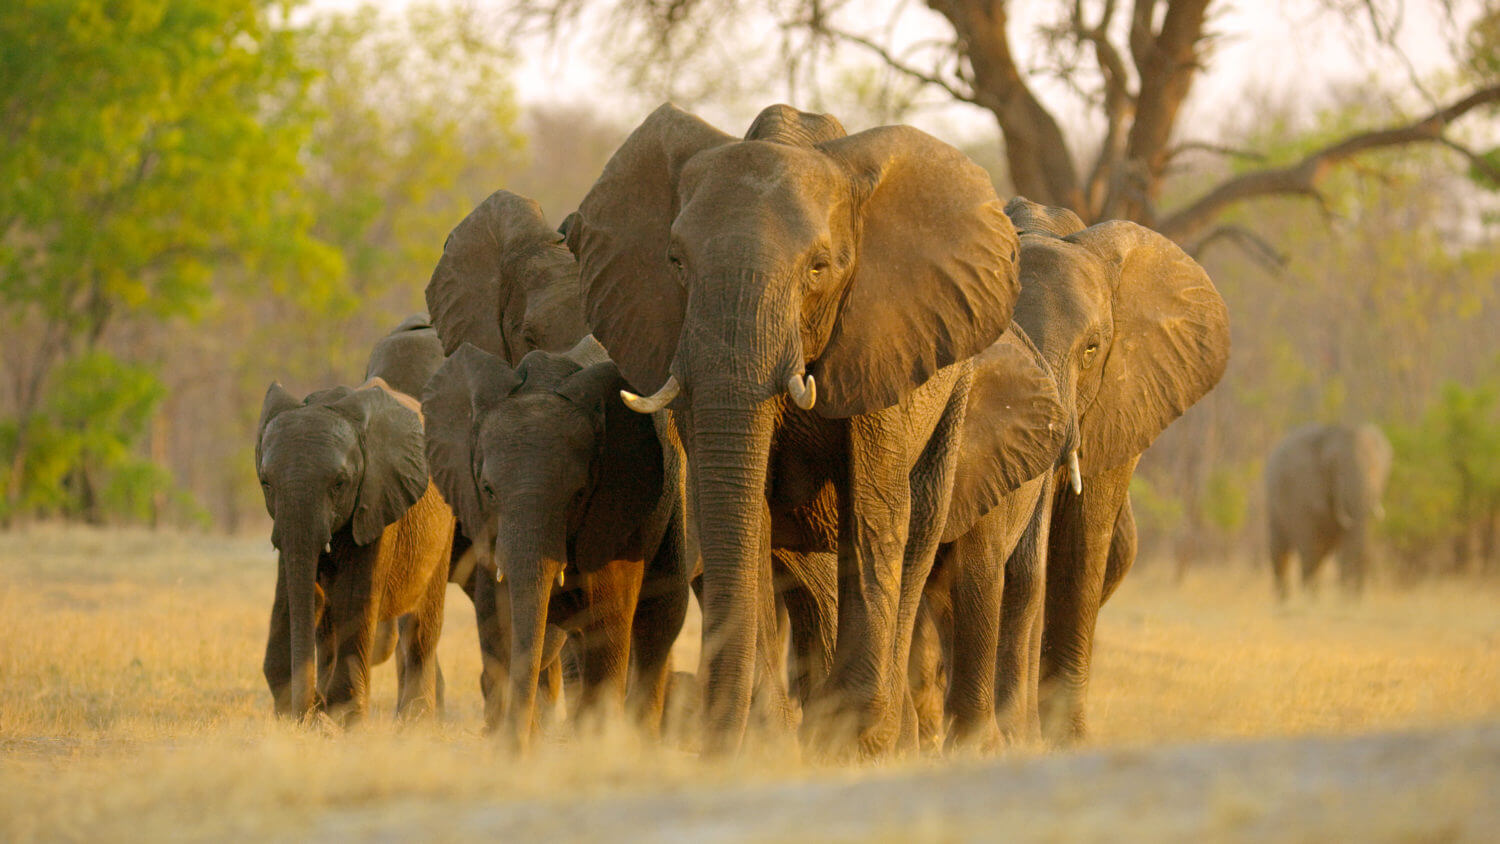 ‘Elephant’ is a Worthy Addition to the Disneynature Collection – Review